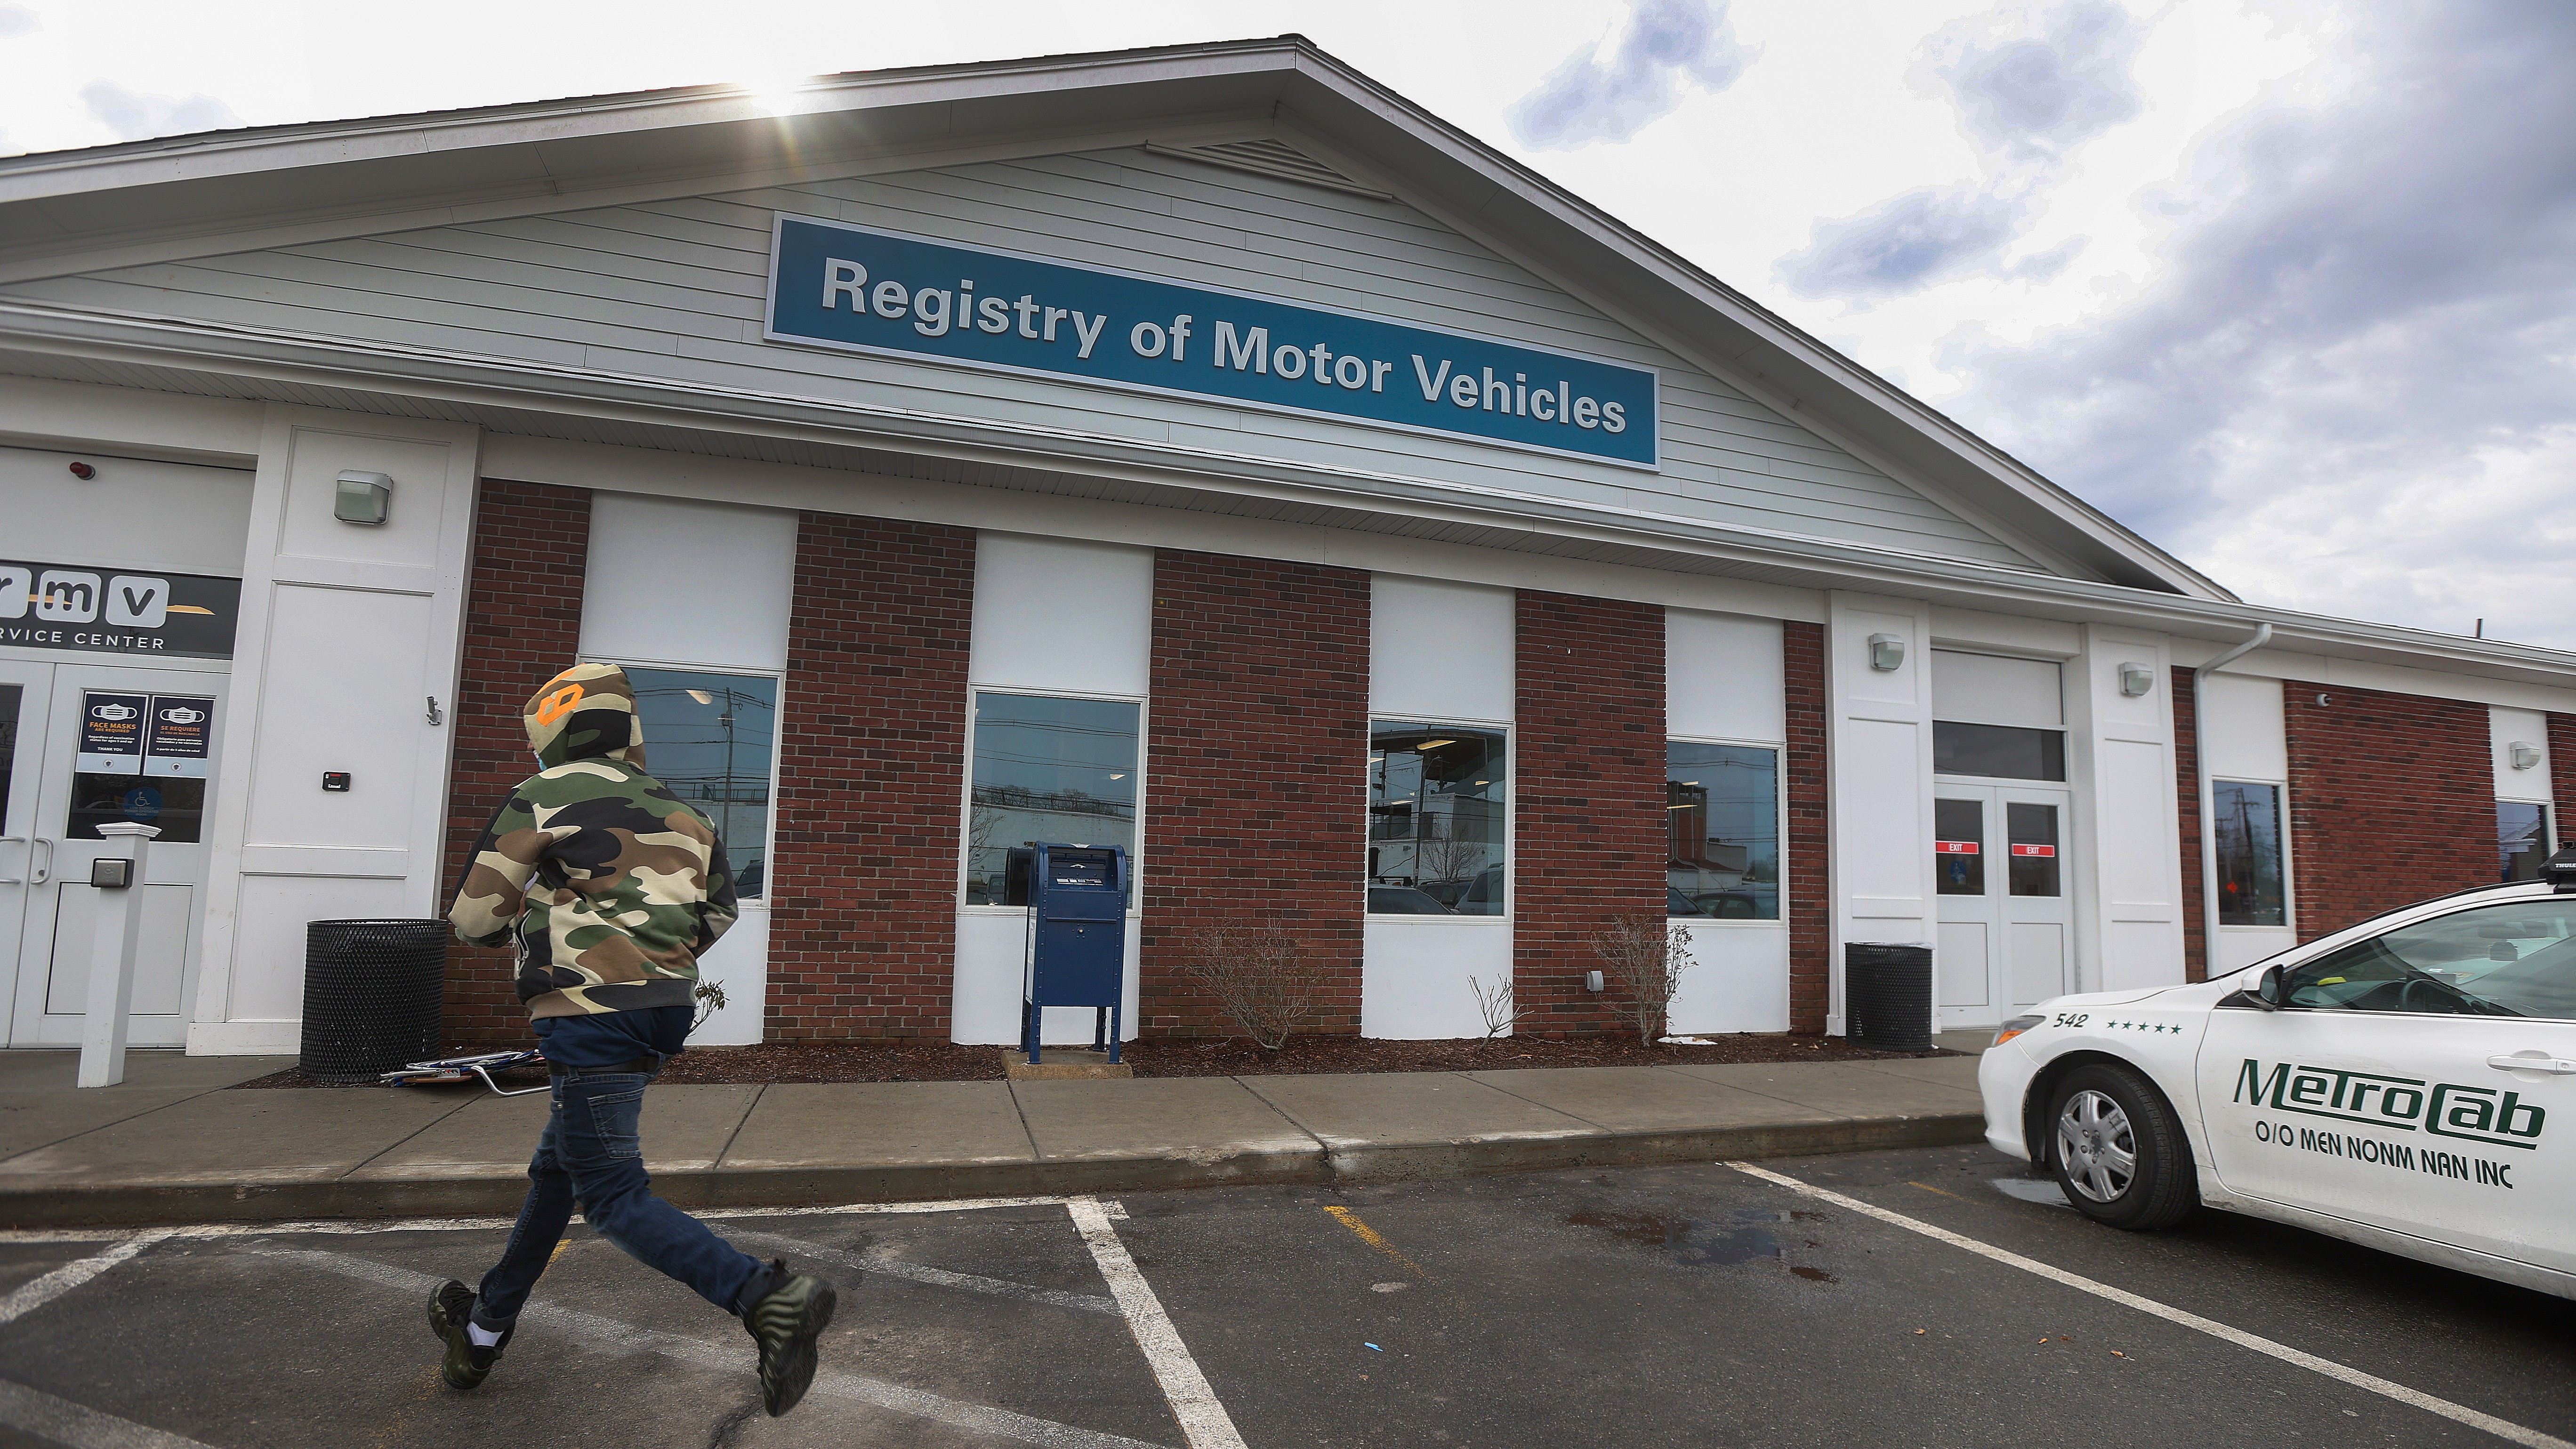 Mass. RMV sees big spike in learner's permits following new law